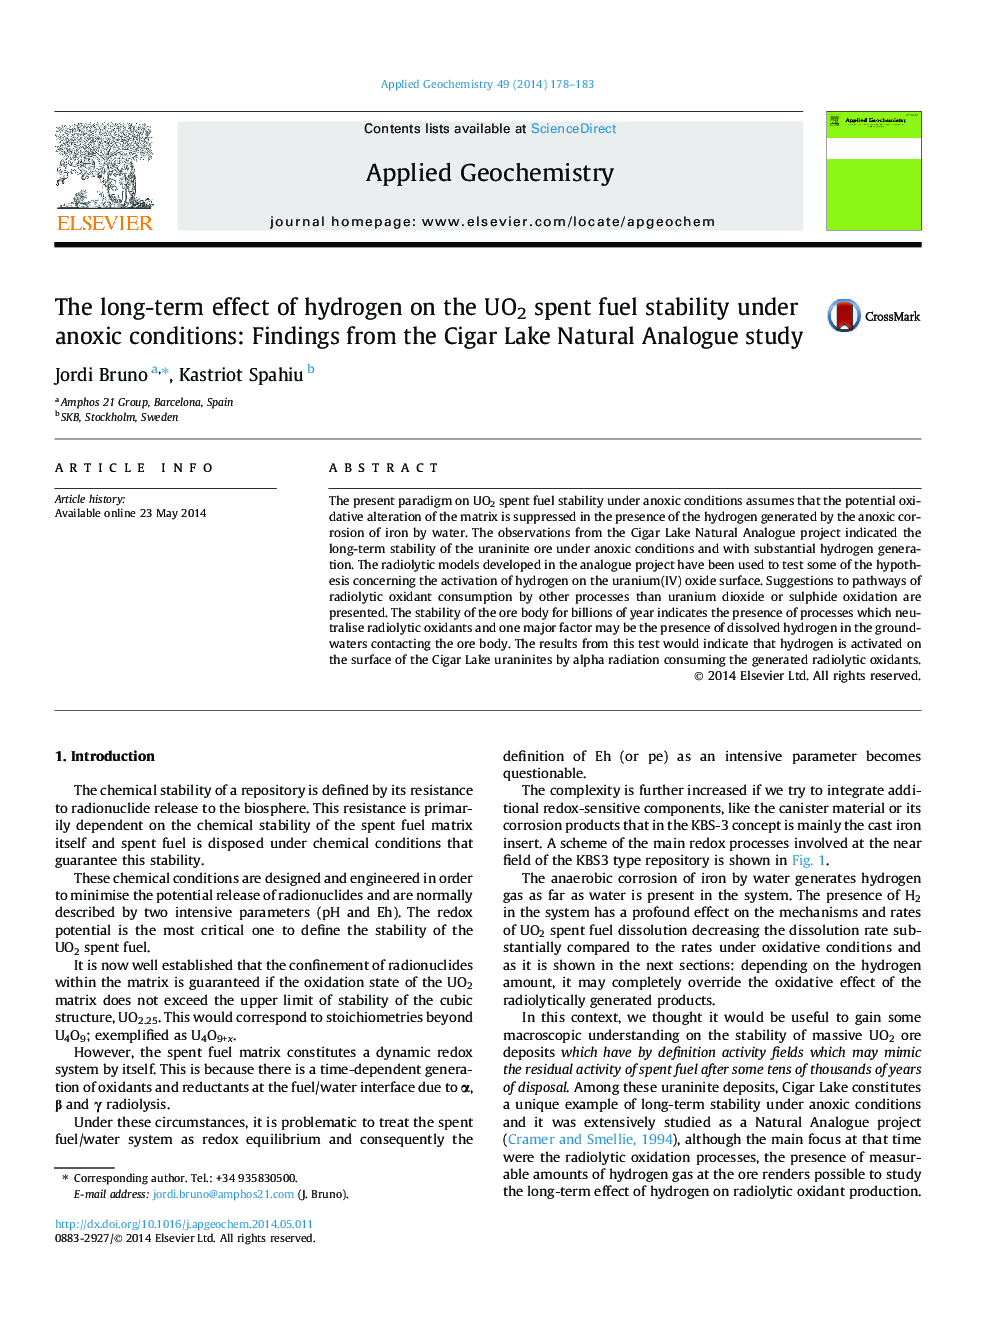 The long-term effect of hydrogen on the UO2 spent fuel stability under anoxic conditions: Findings from the Cigar Lake Natural Analogue study